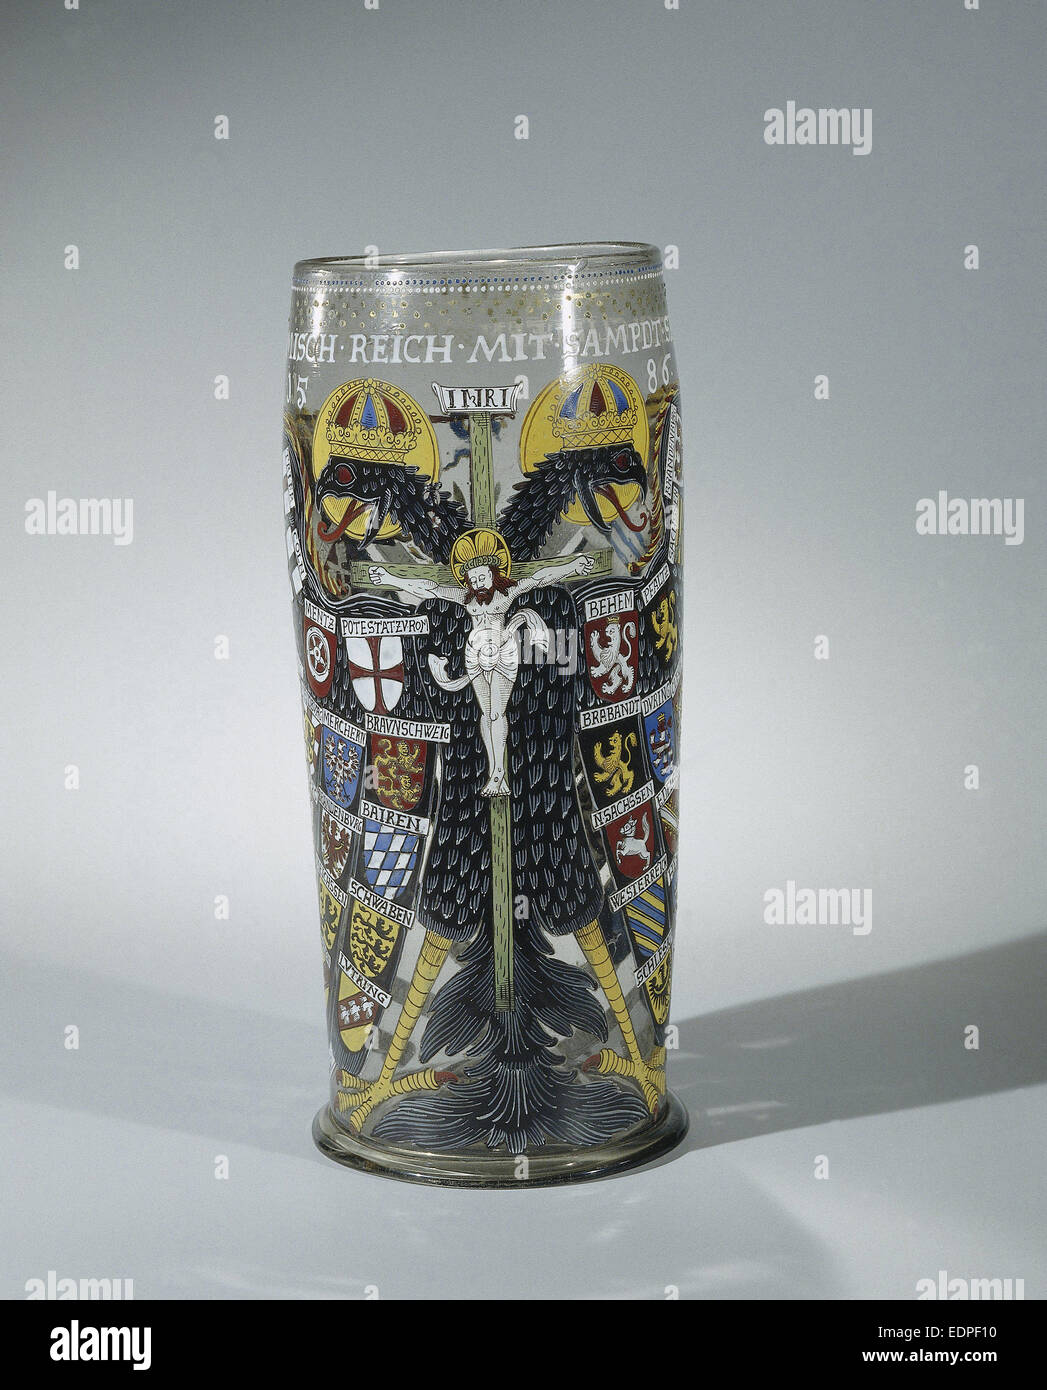 Reichsadler humpen, Anonymous, 1586, Imperial Eagle cylindrical drinking glass. Stock Photo